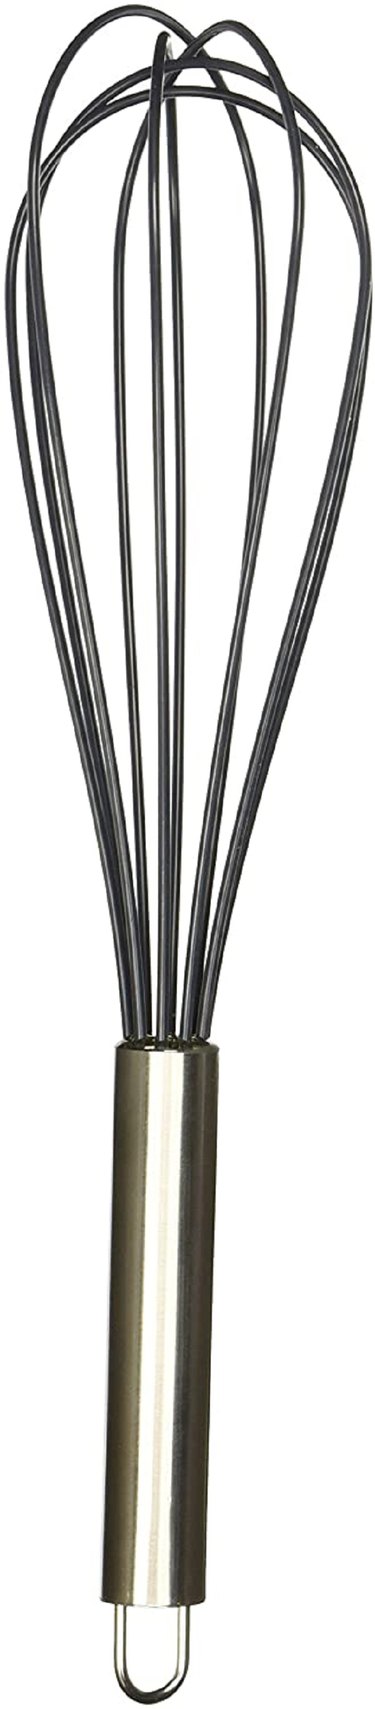 A Cuisinart 12-Inch Silicone Balloon Whisk